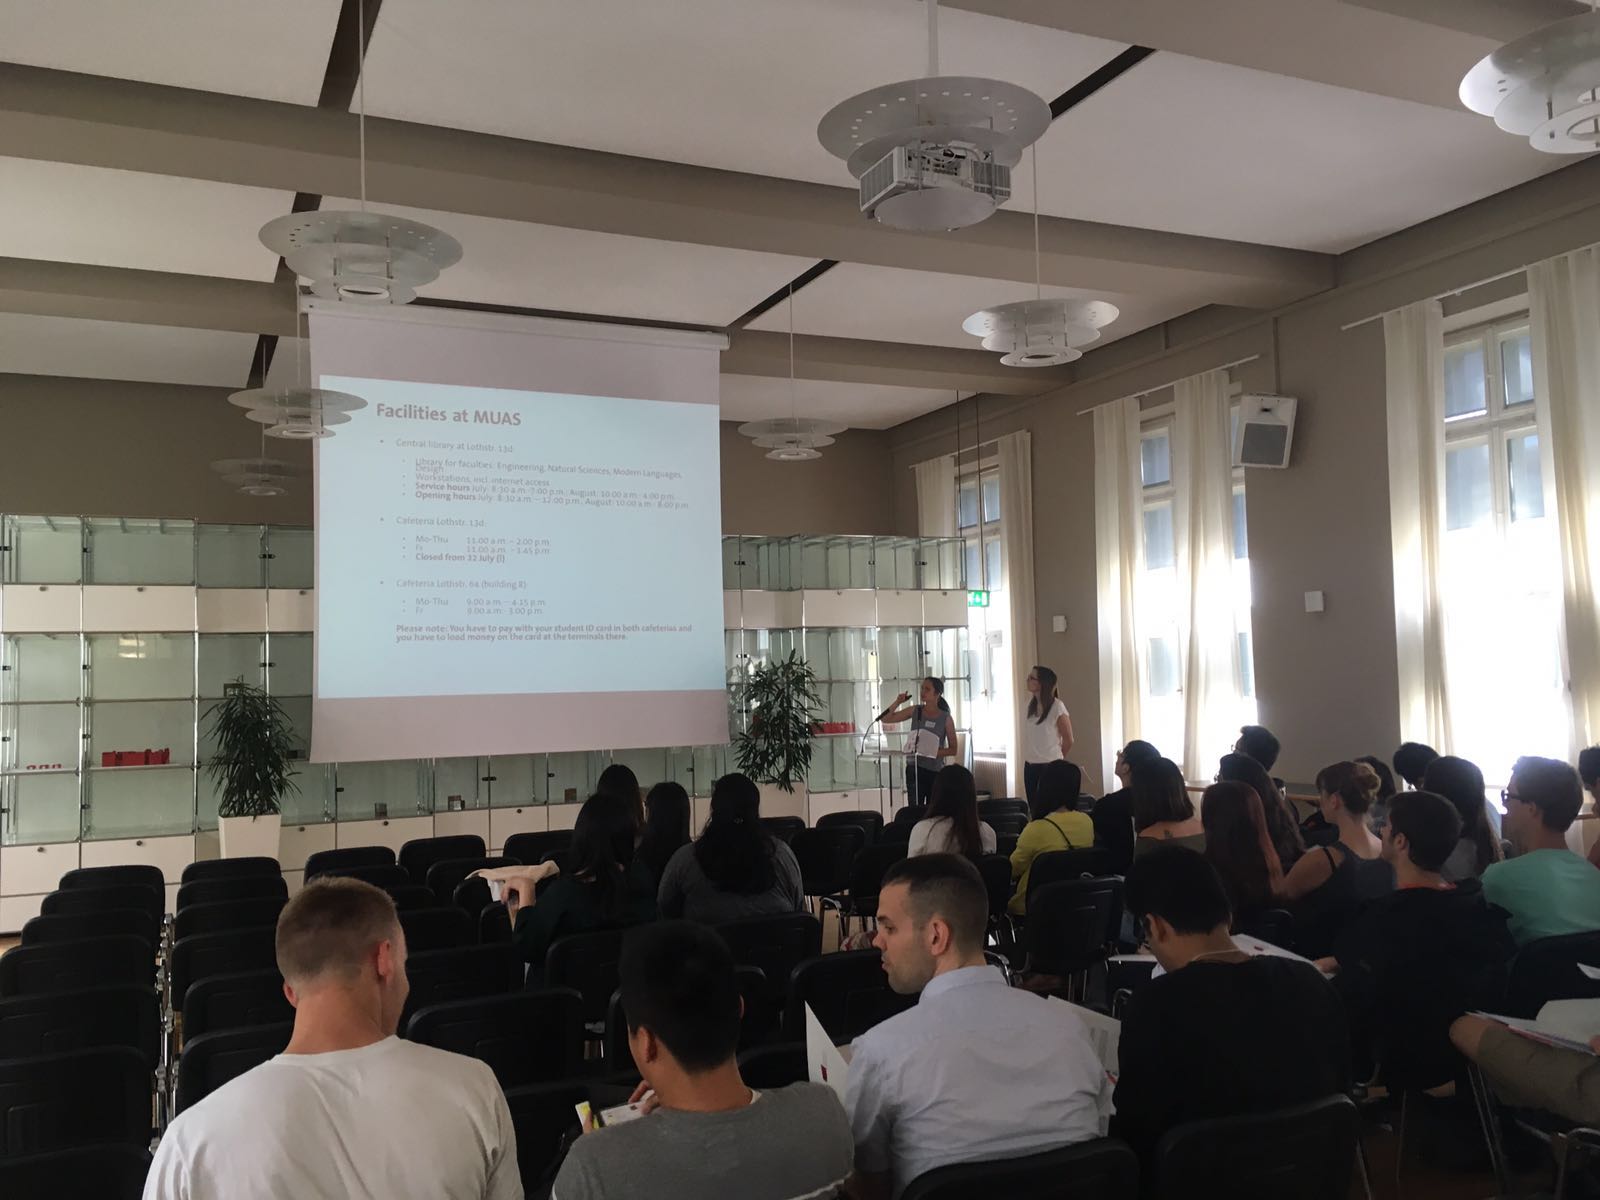 Students sitting in the Oskar von Miller Hall of the Munich University of Applied Sciences on Welcome Day, Ms. Vasil standing in front and assisting in giving the presentation about the summer school